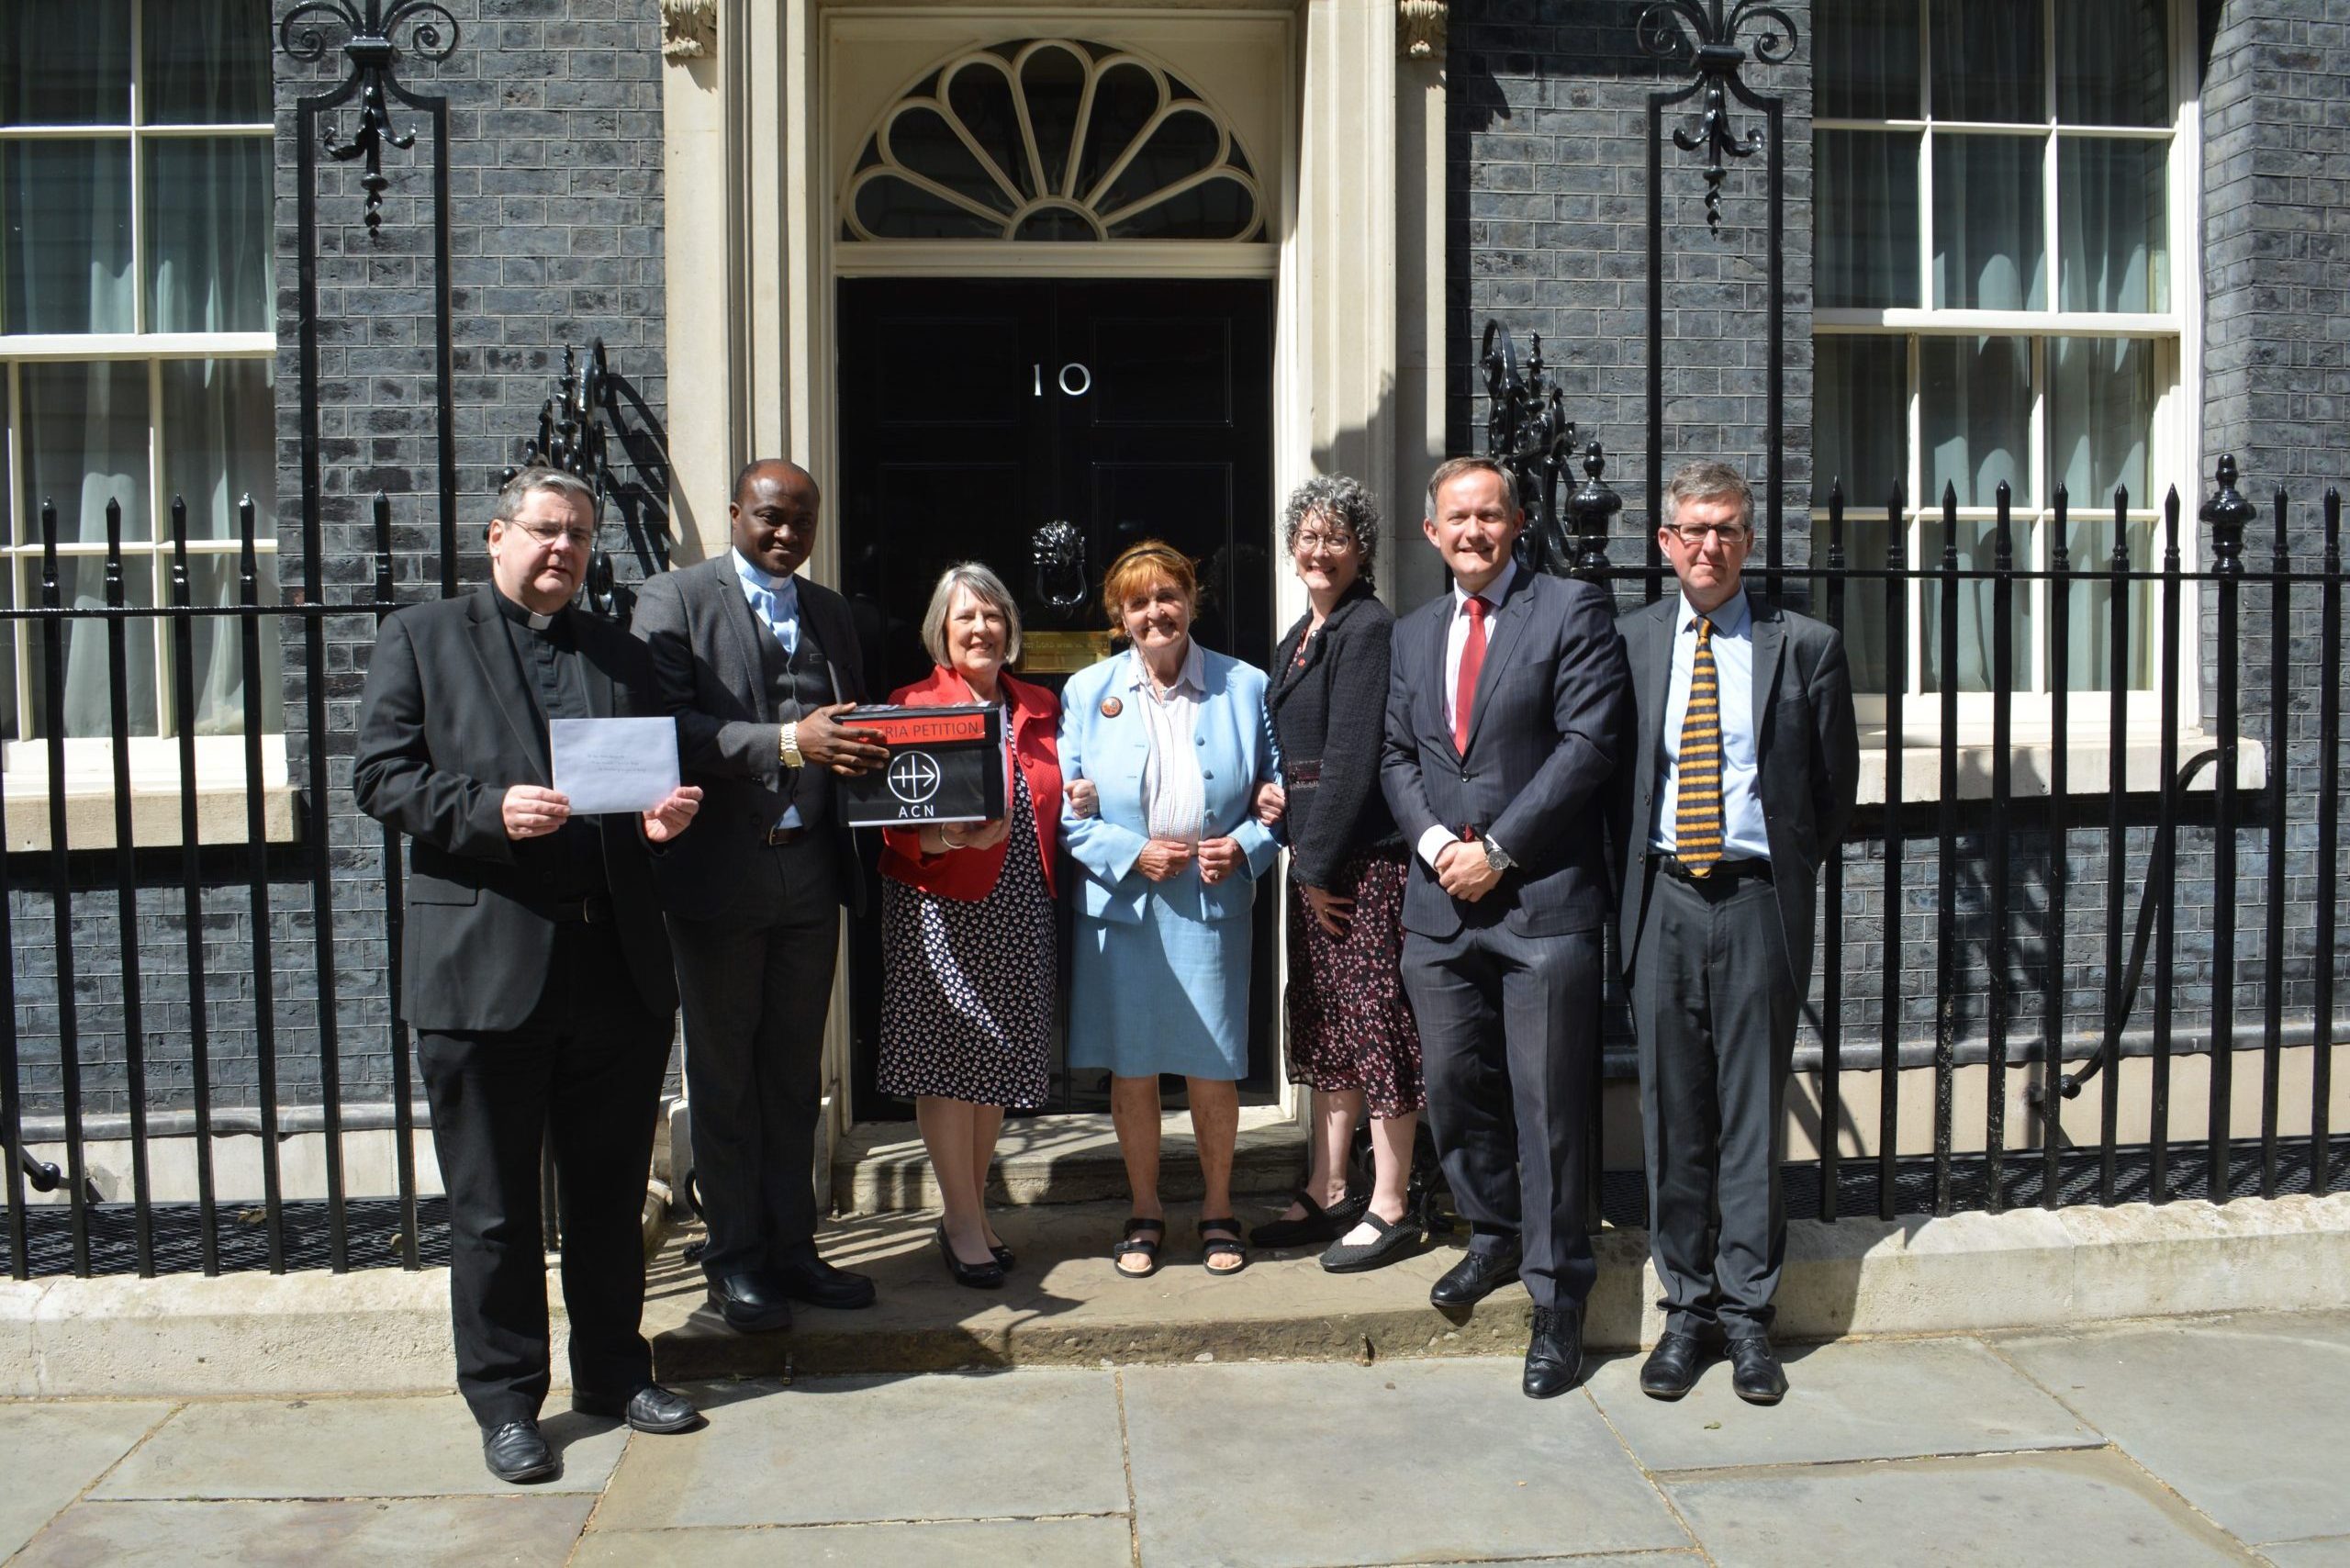 Submitting the petition at No. 10 (from left to right): Father Dominic Robinson, Father Matthew Madewa, Fiona Bruce MP, Baroness Caroline Cox, Caroline Hull, John Pontifex and Mike Watts.